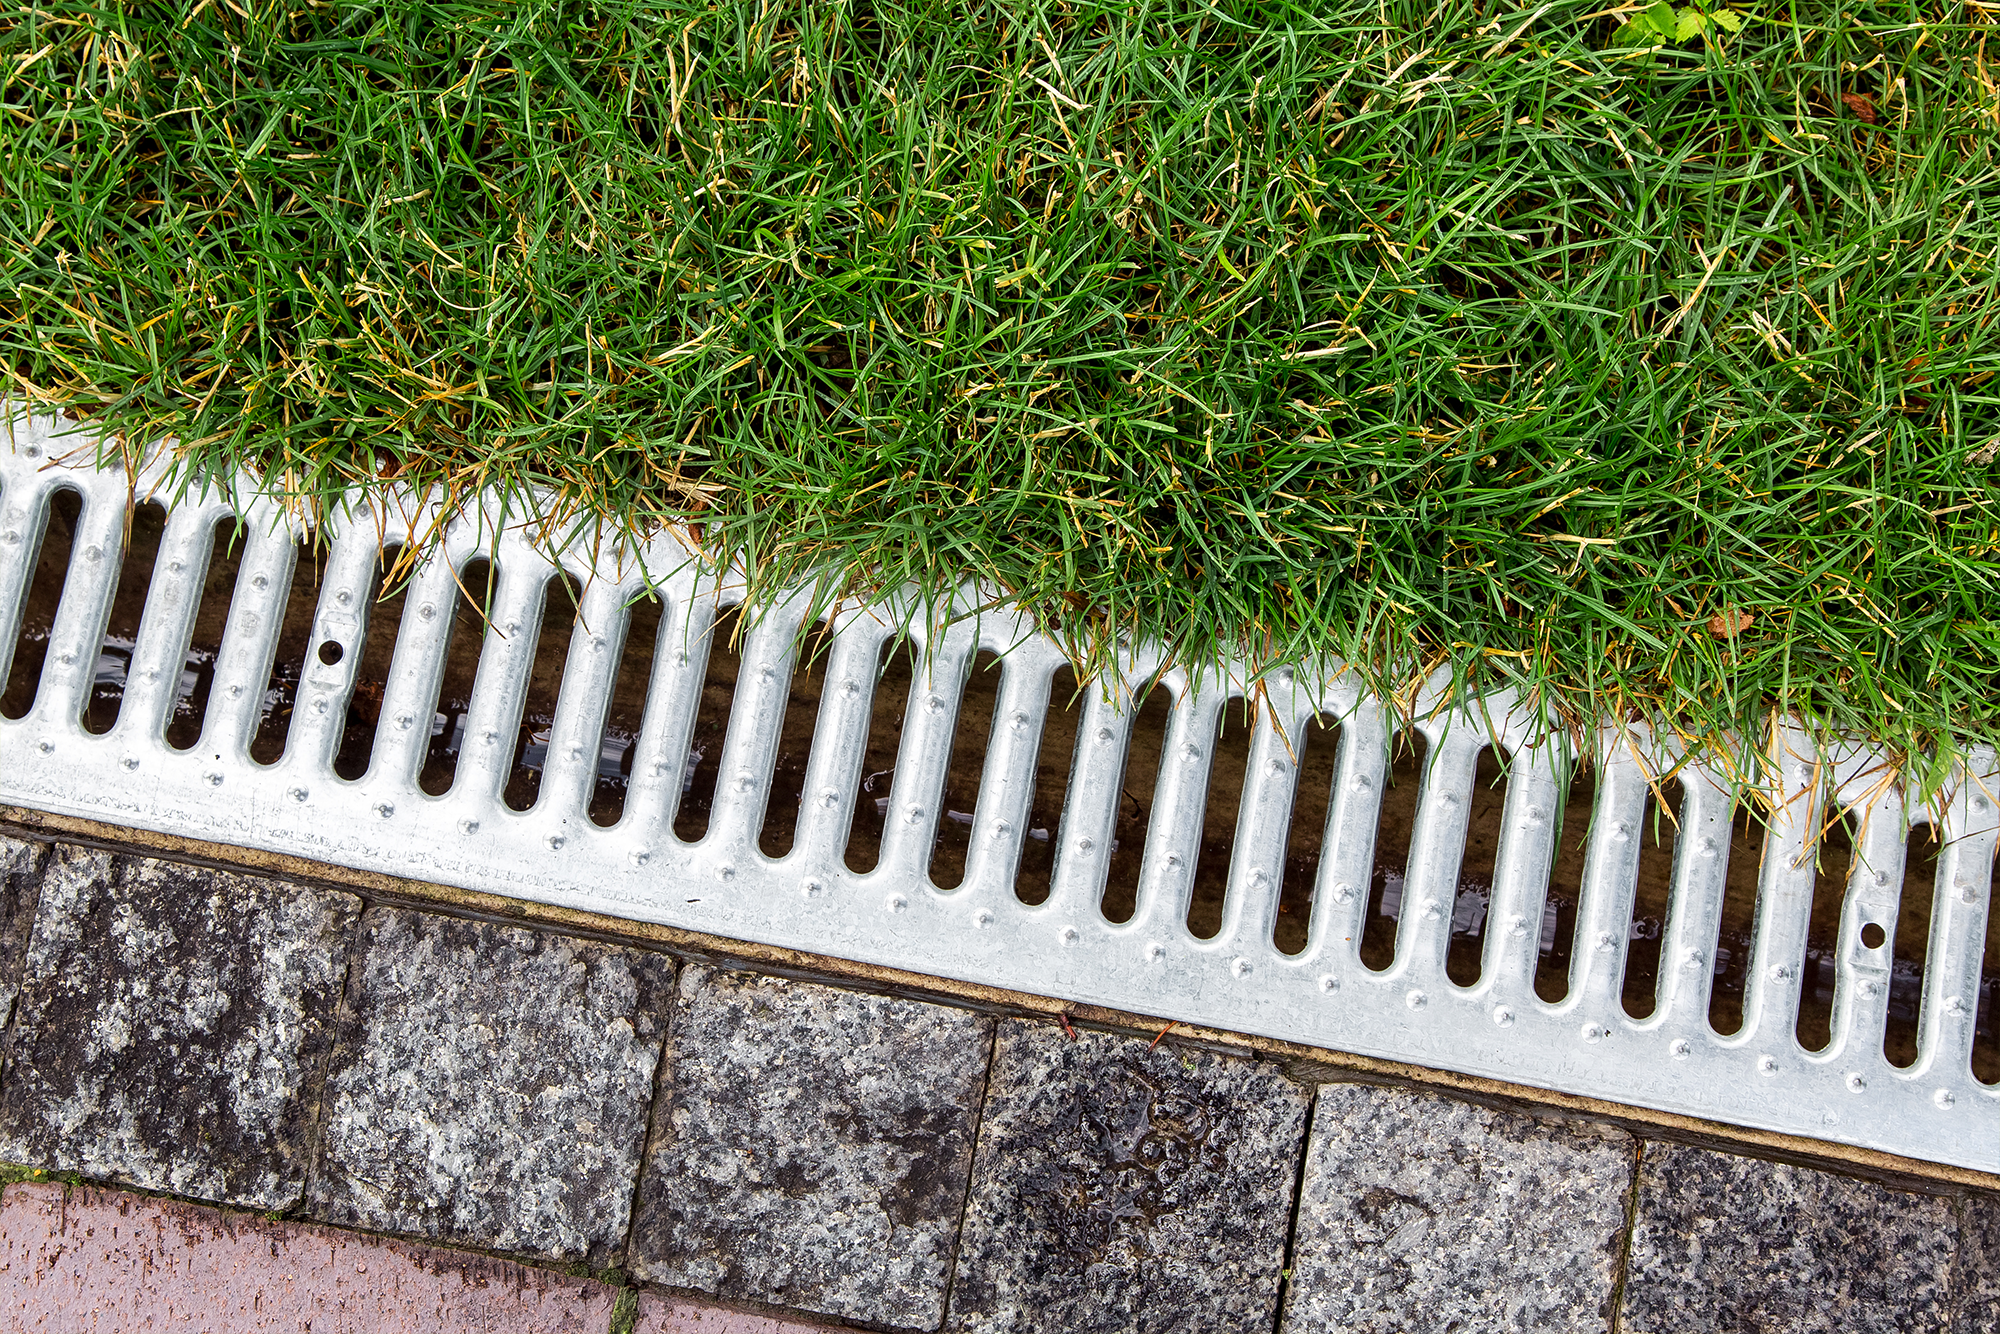 Iron grate of a storm drainage system on the side of a footpath made of pavers near a green lawn top view with rain water